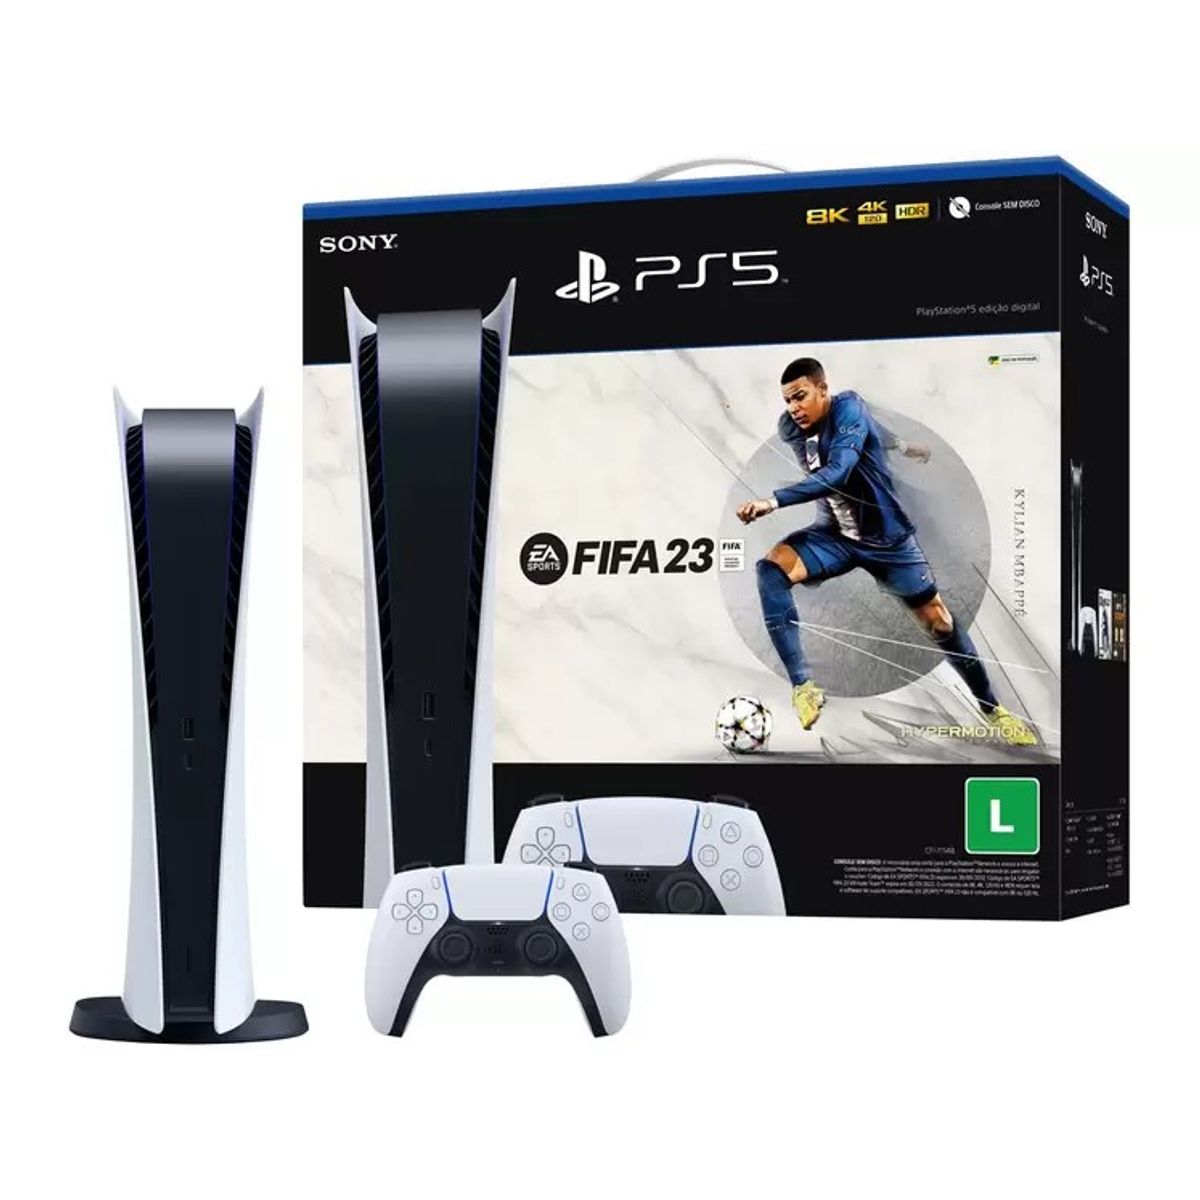  FIFA 23 - For PlayStation 4 : Video Games